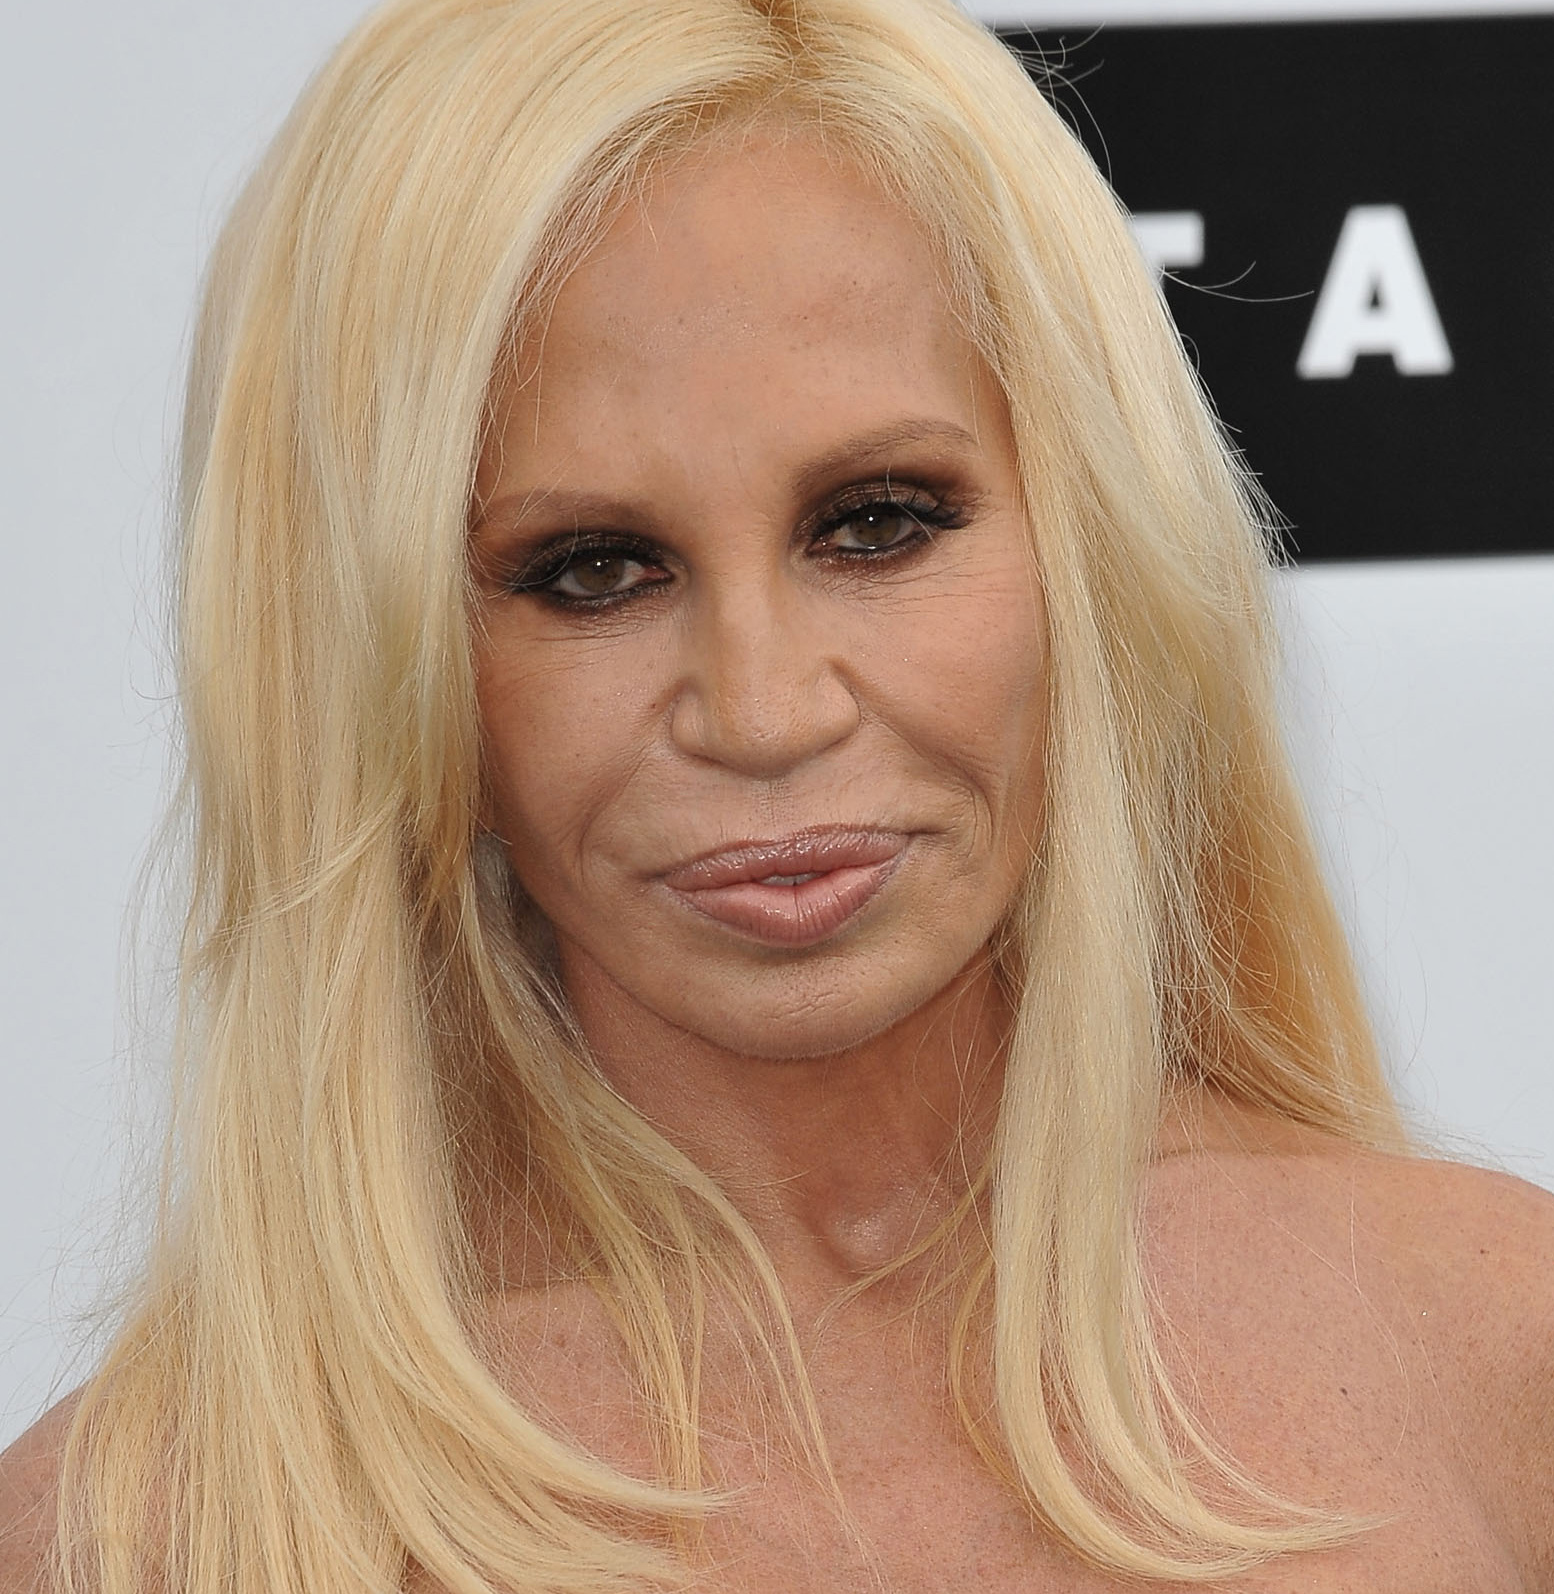 See Donatella Versace's Shocking Transformation Right Before Your